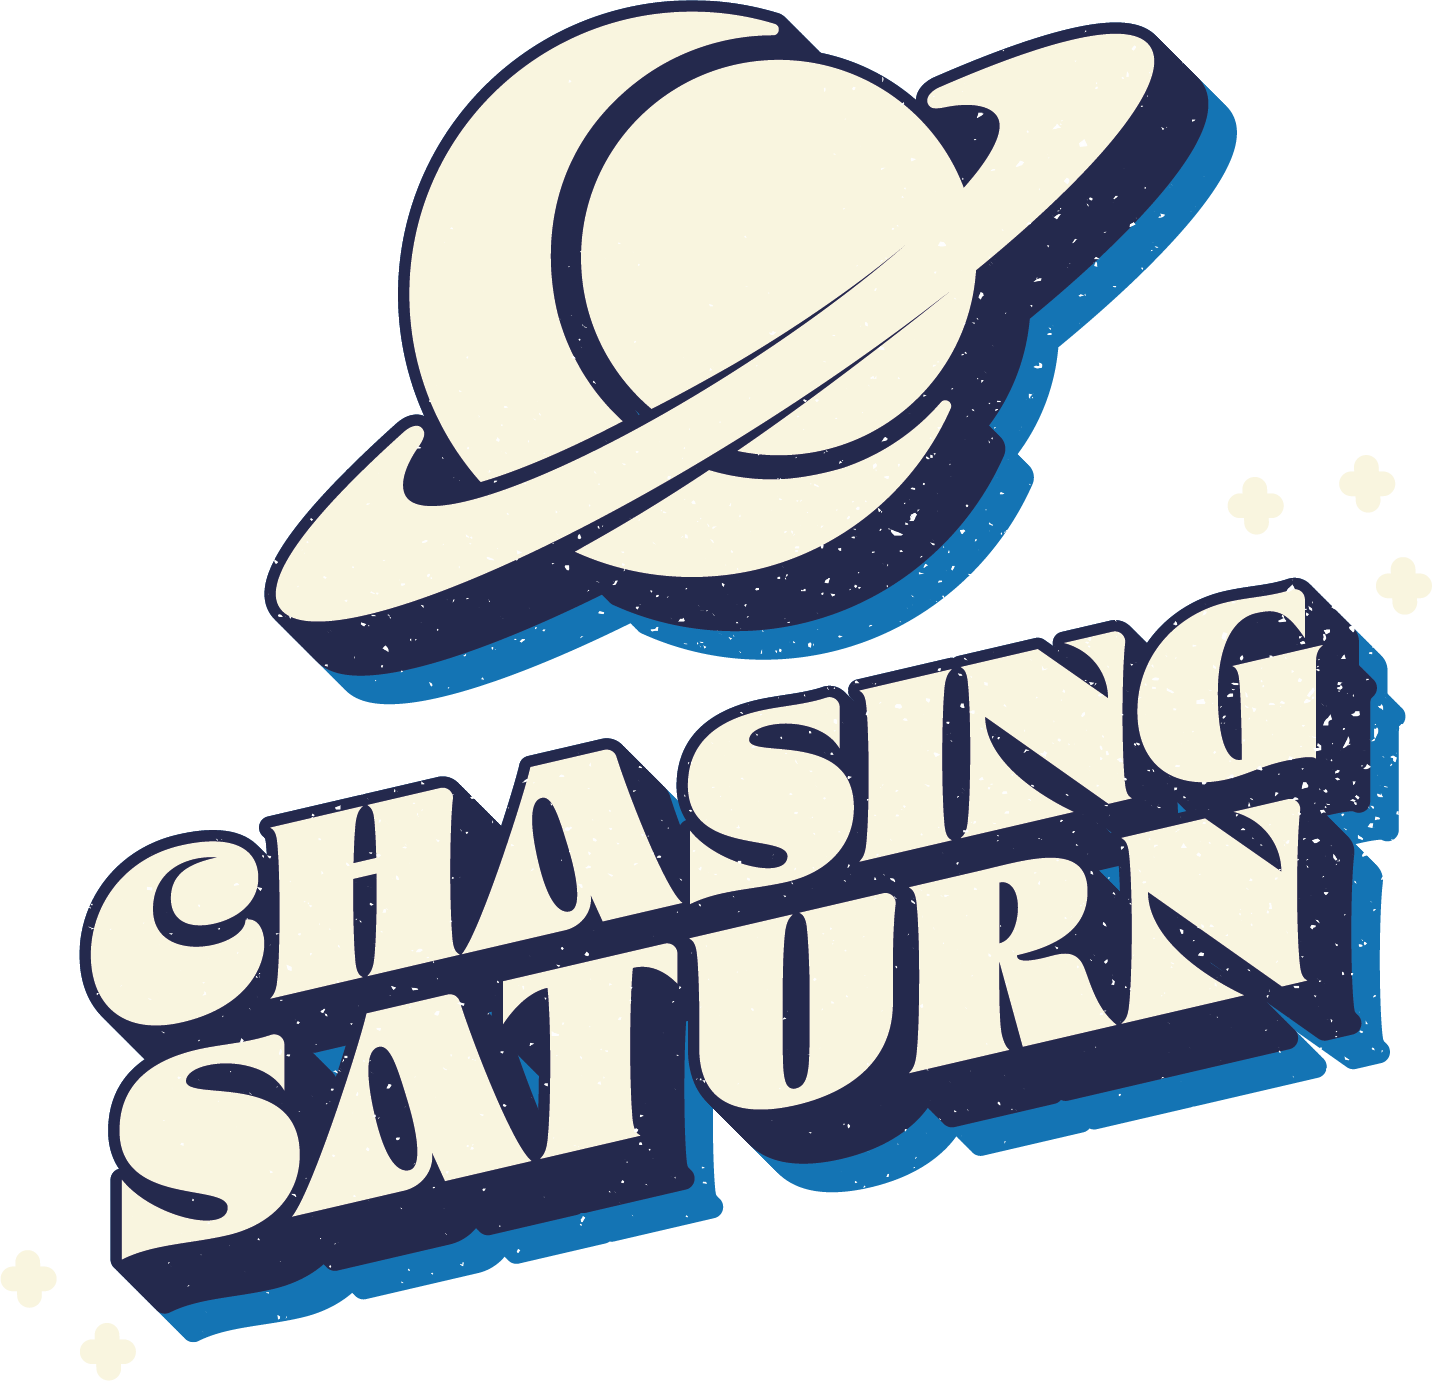 Chasing Saturn Vocal Band